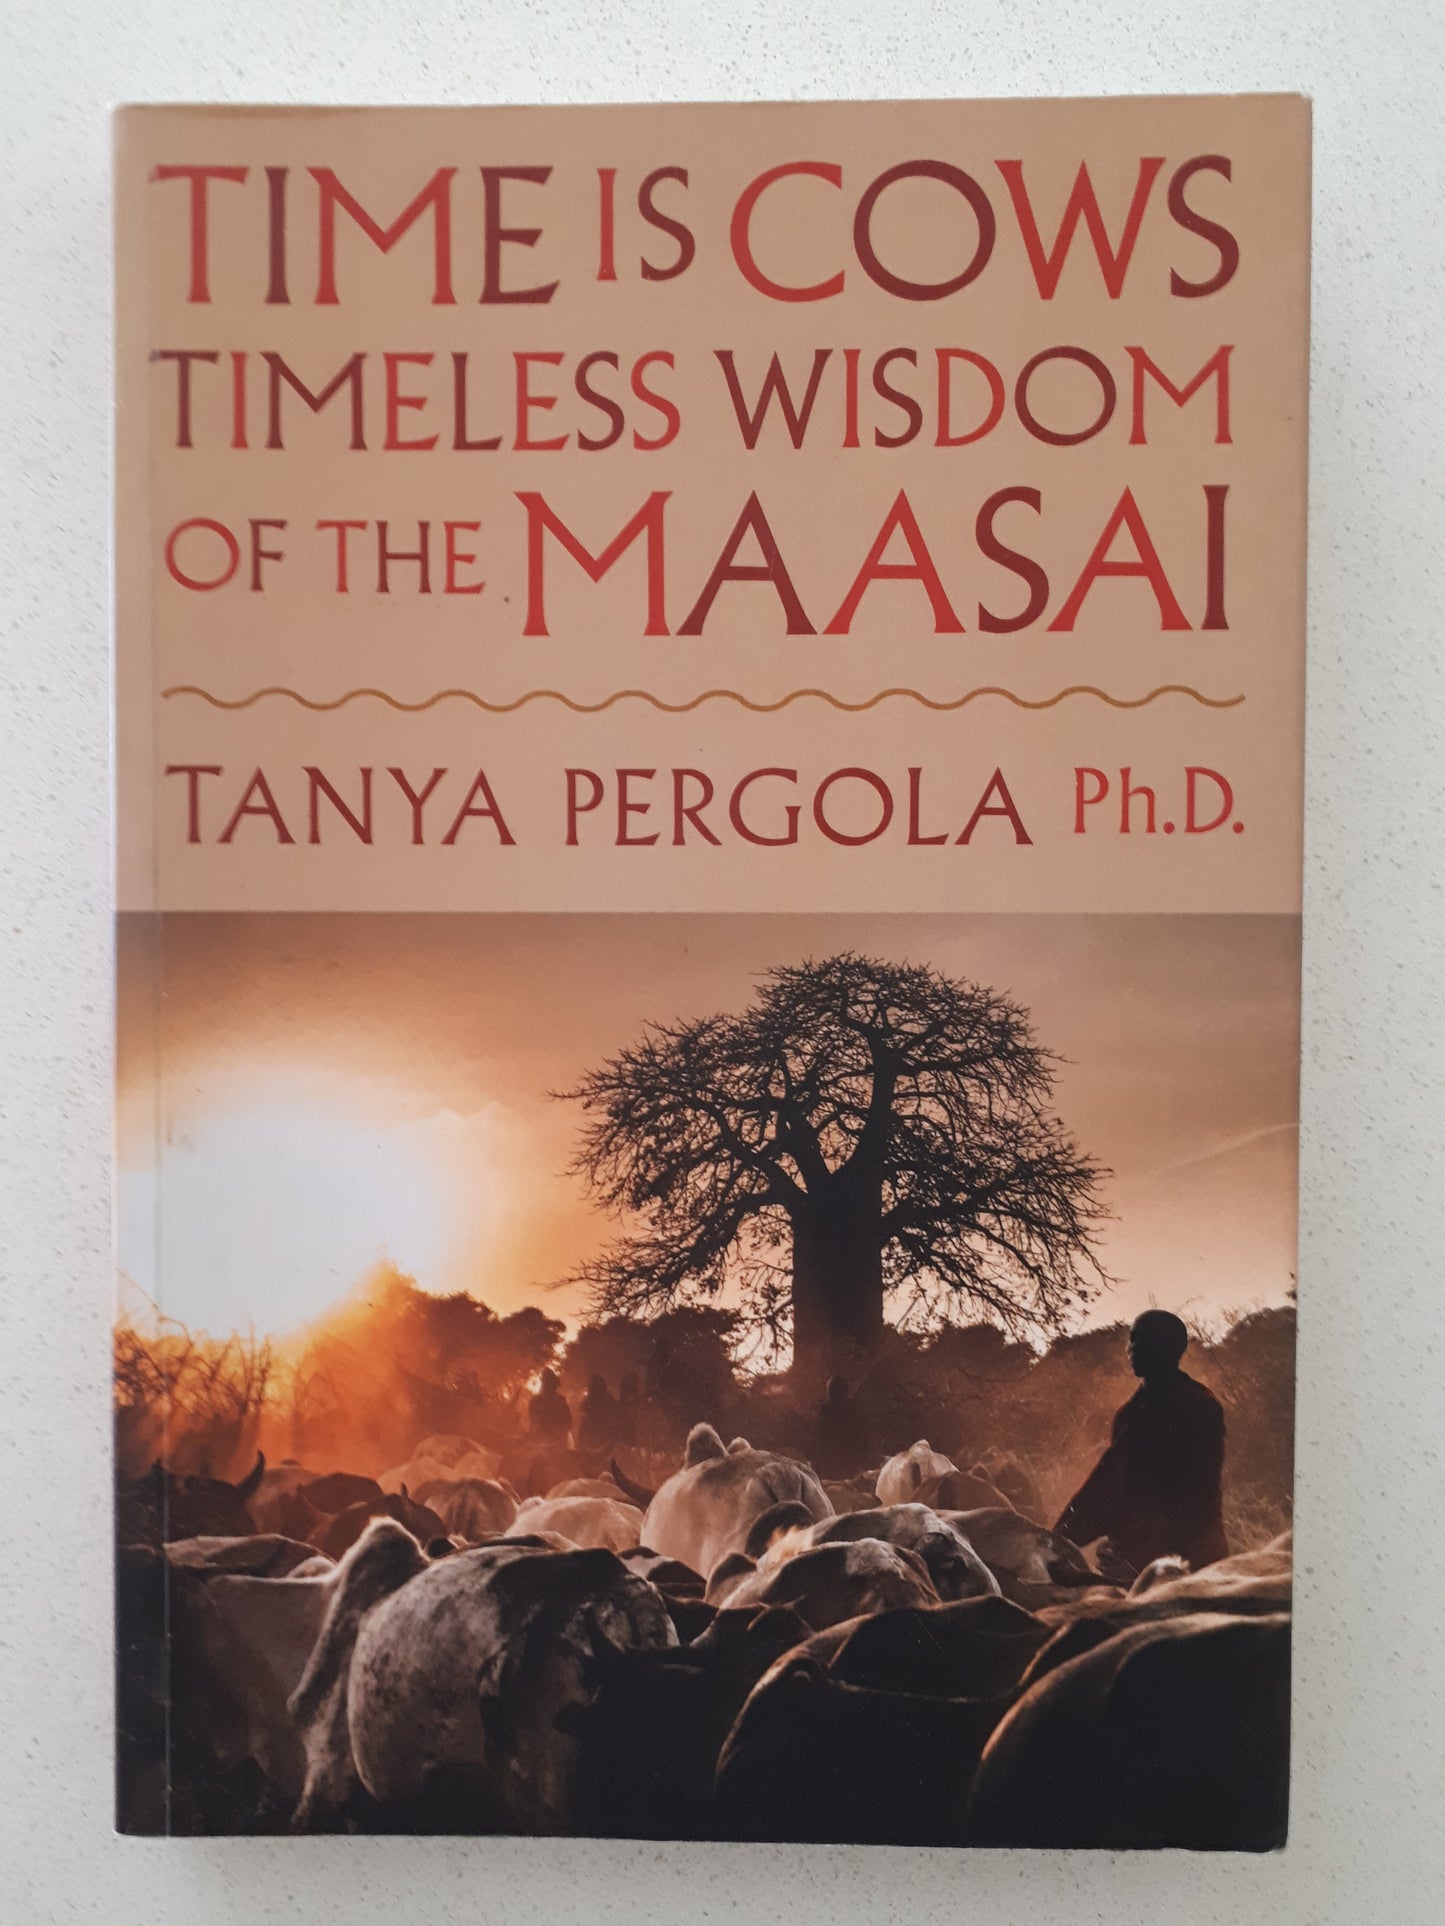 Time Is Cows Timeless Wisdom Of The Maasai by Tanya Pergola